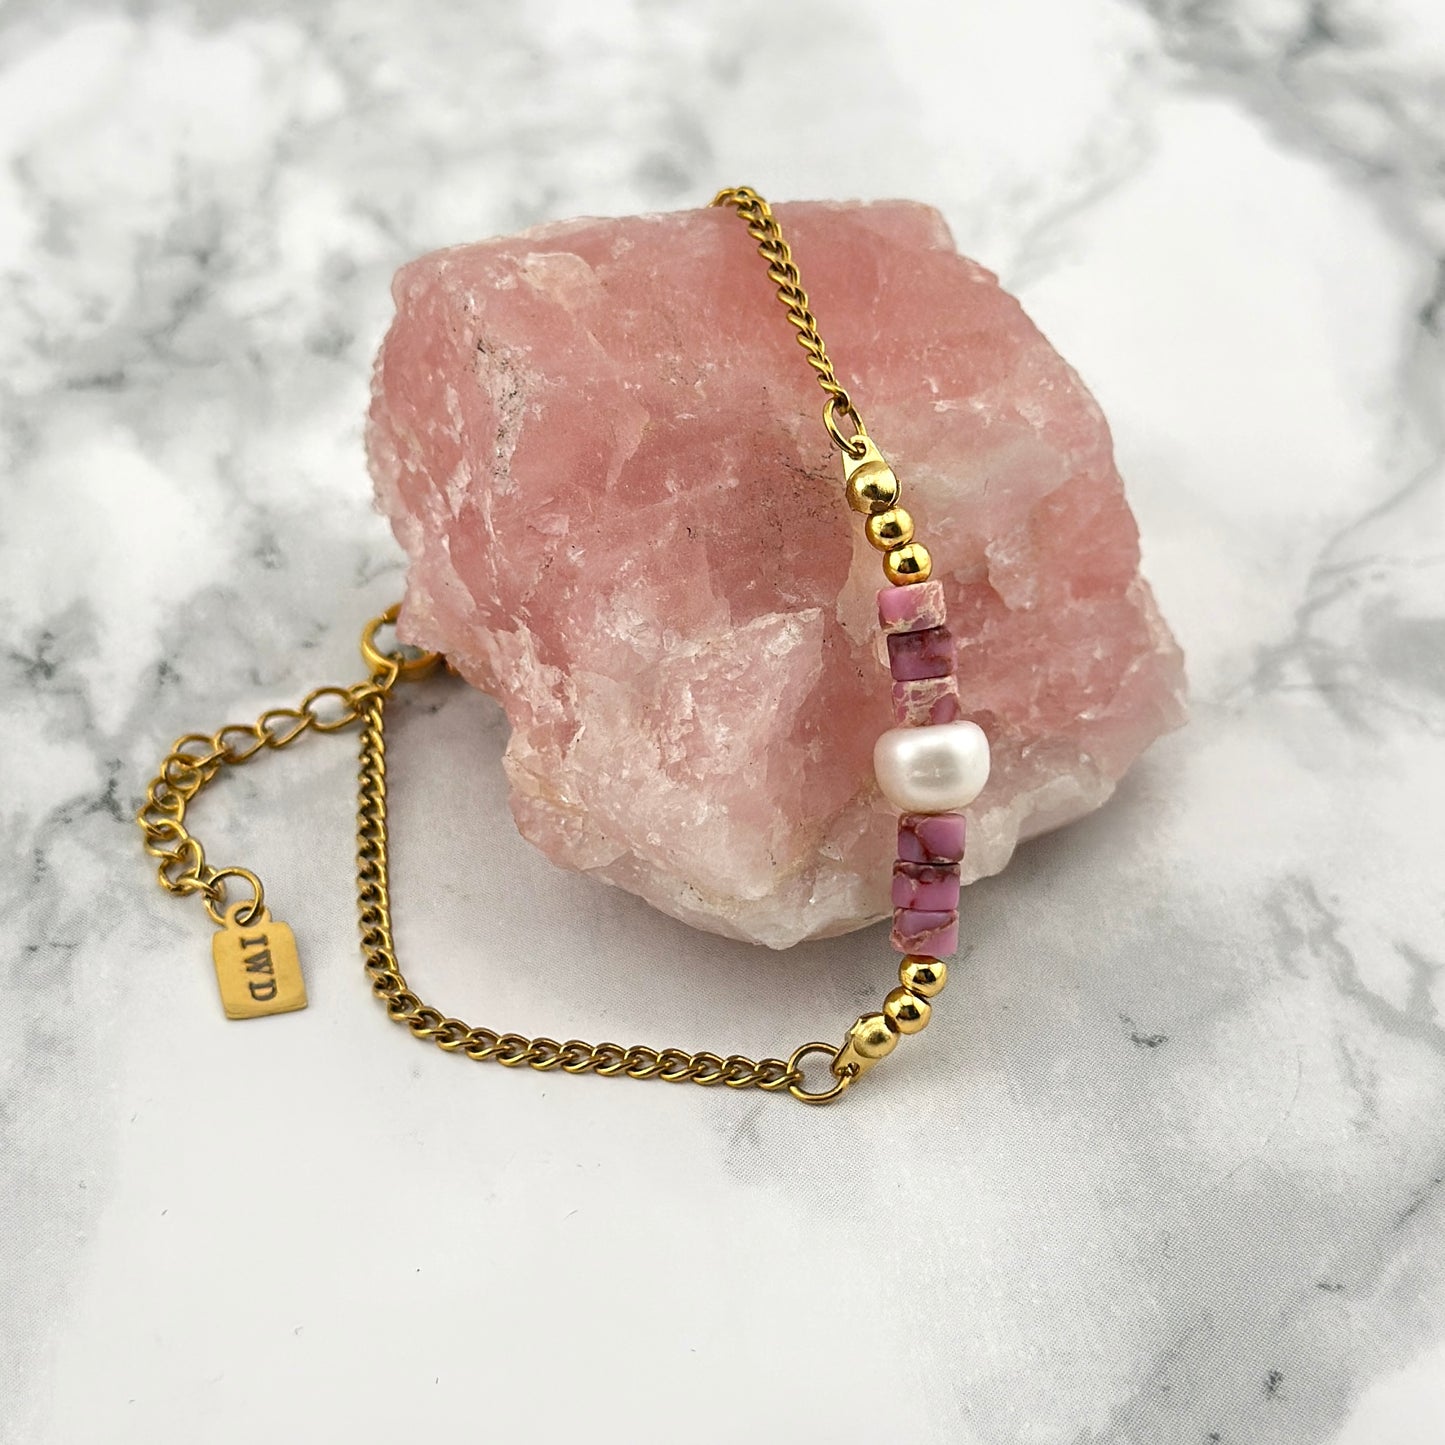 Golden Bracelet with Pink Beads